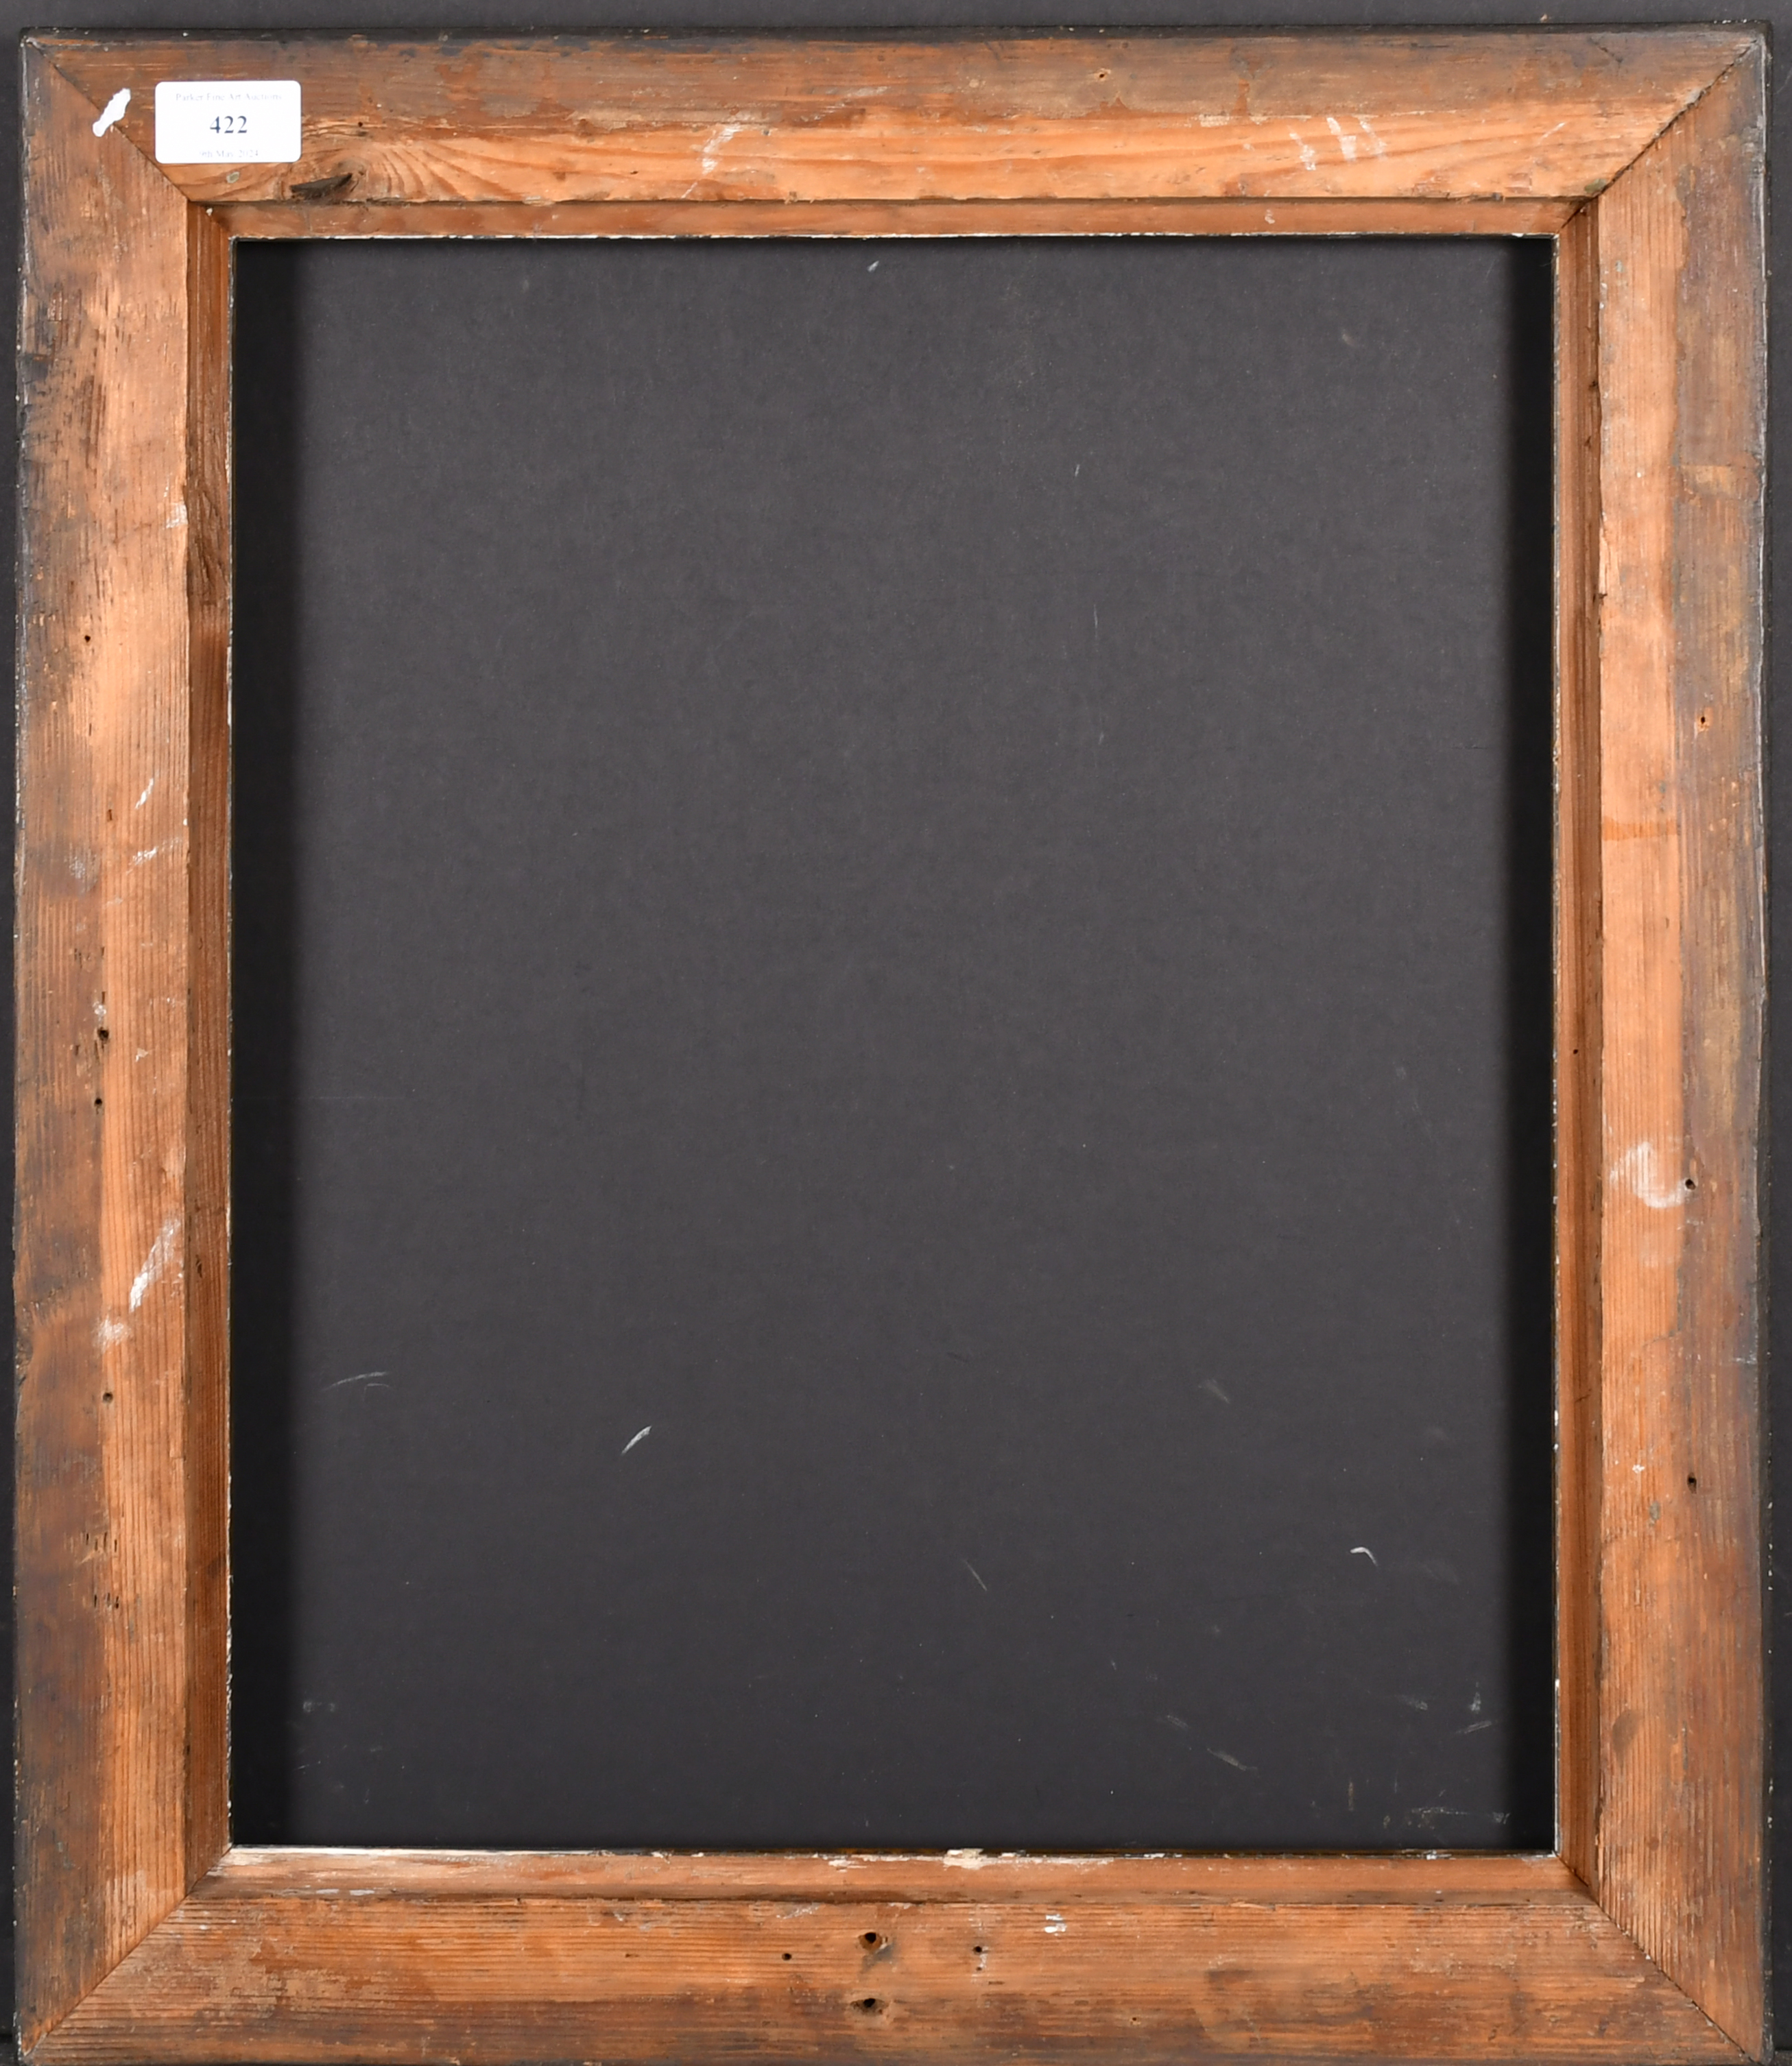 19th Century English School. A Silver Composition Frame, rebate 17.25" x 14.25" (43.7 x 36.2cm) - Image 3 of 3